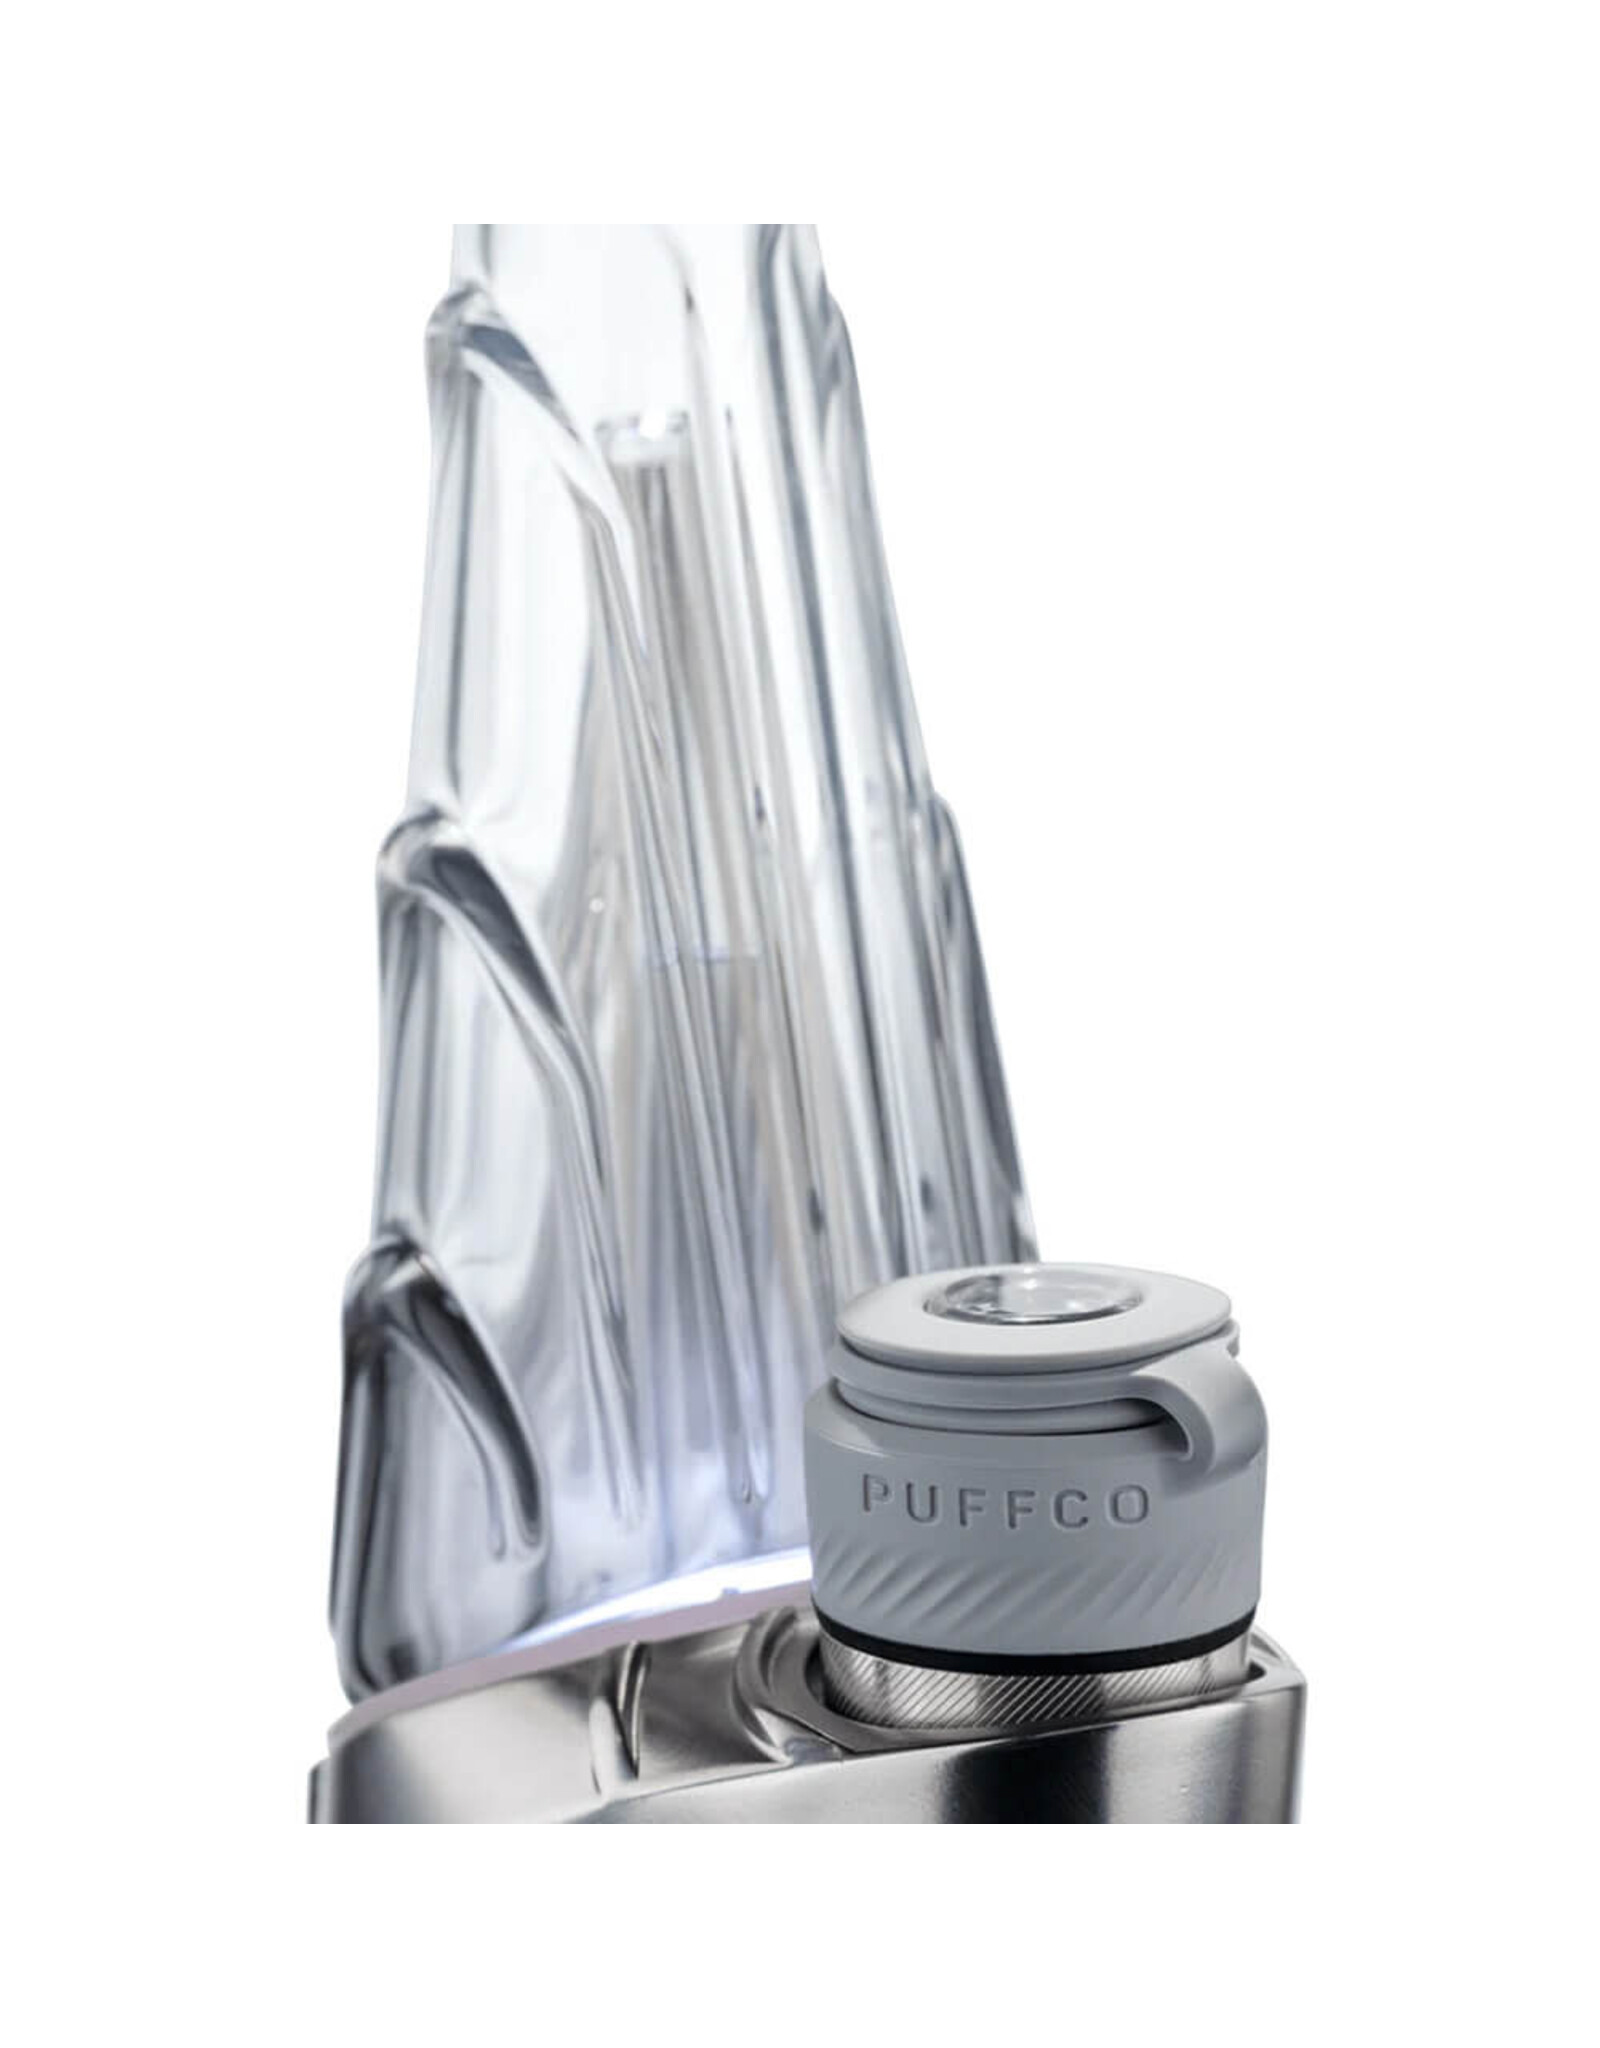 Puffco Puffco Peak Pro The Guardian Special Edition